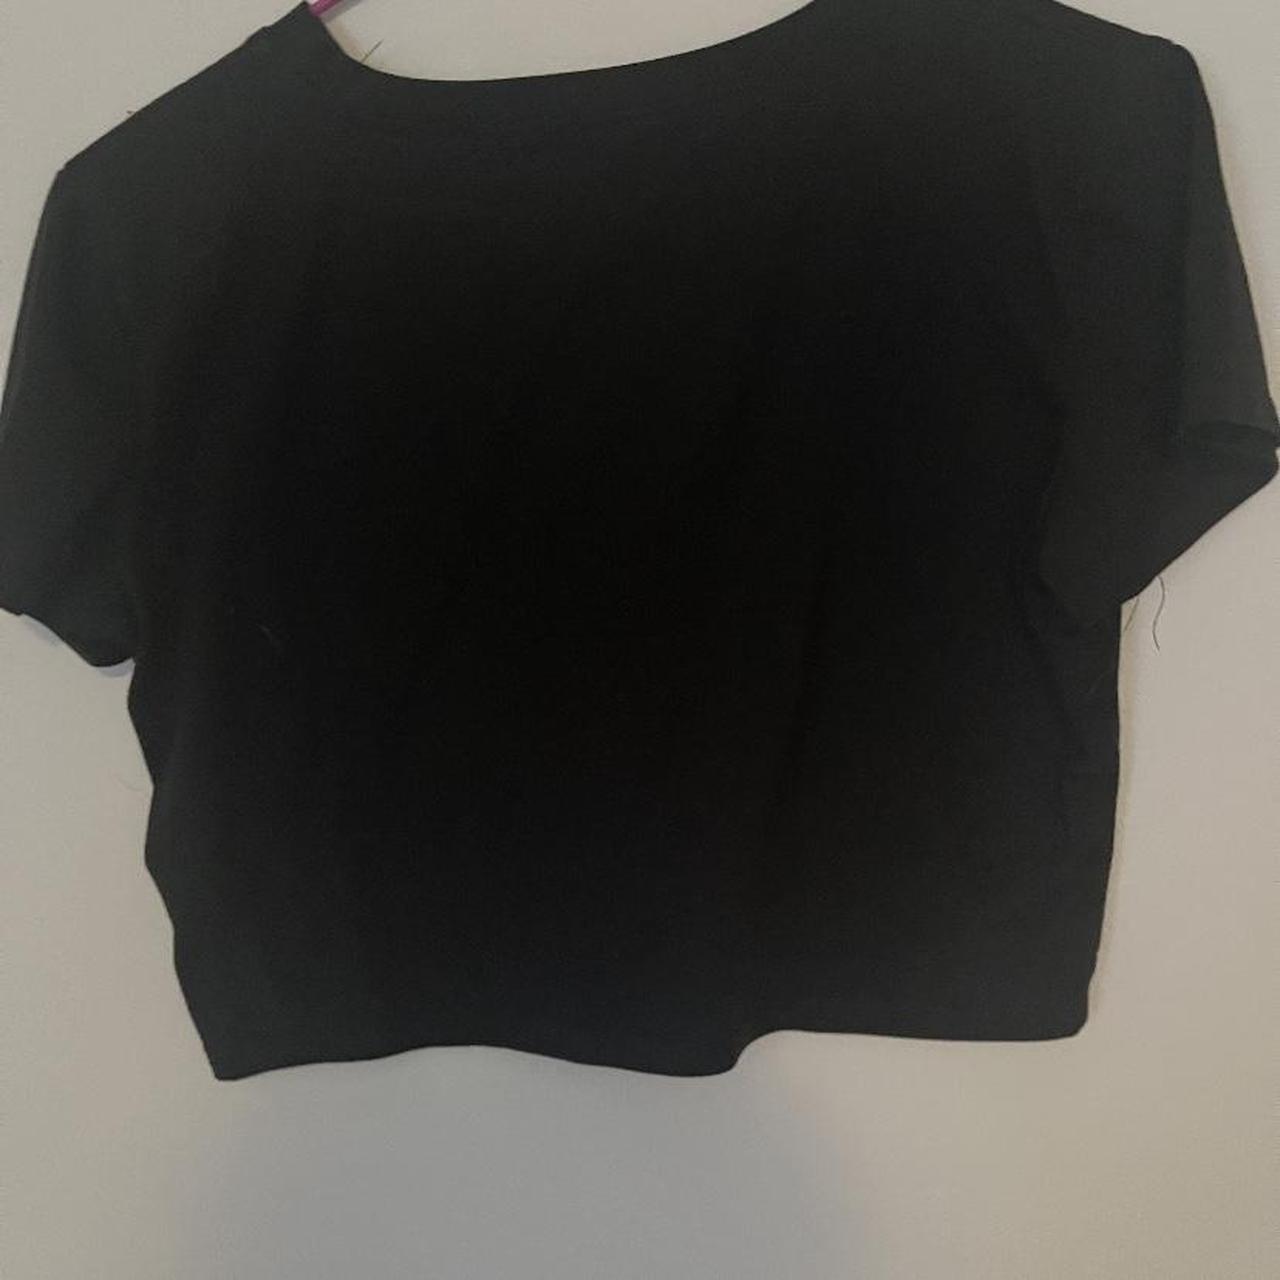 All Black Women's Red and Black Shirt (2)